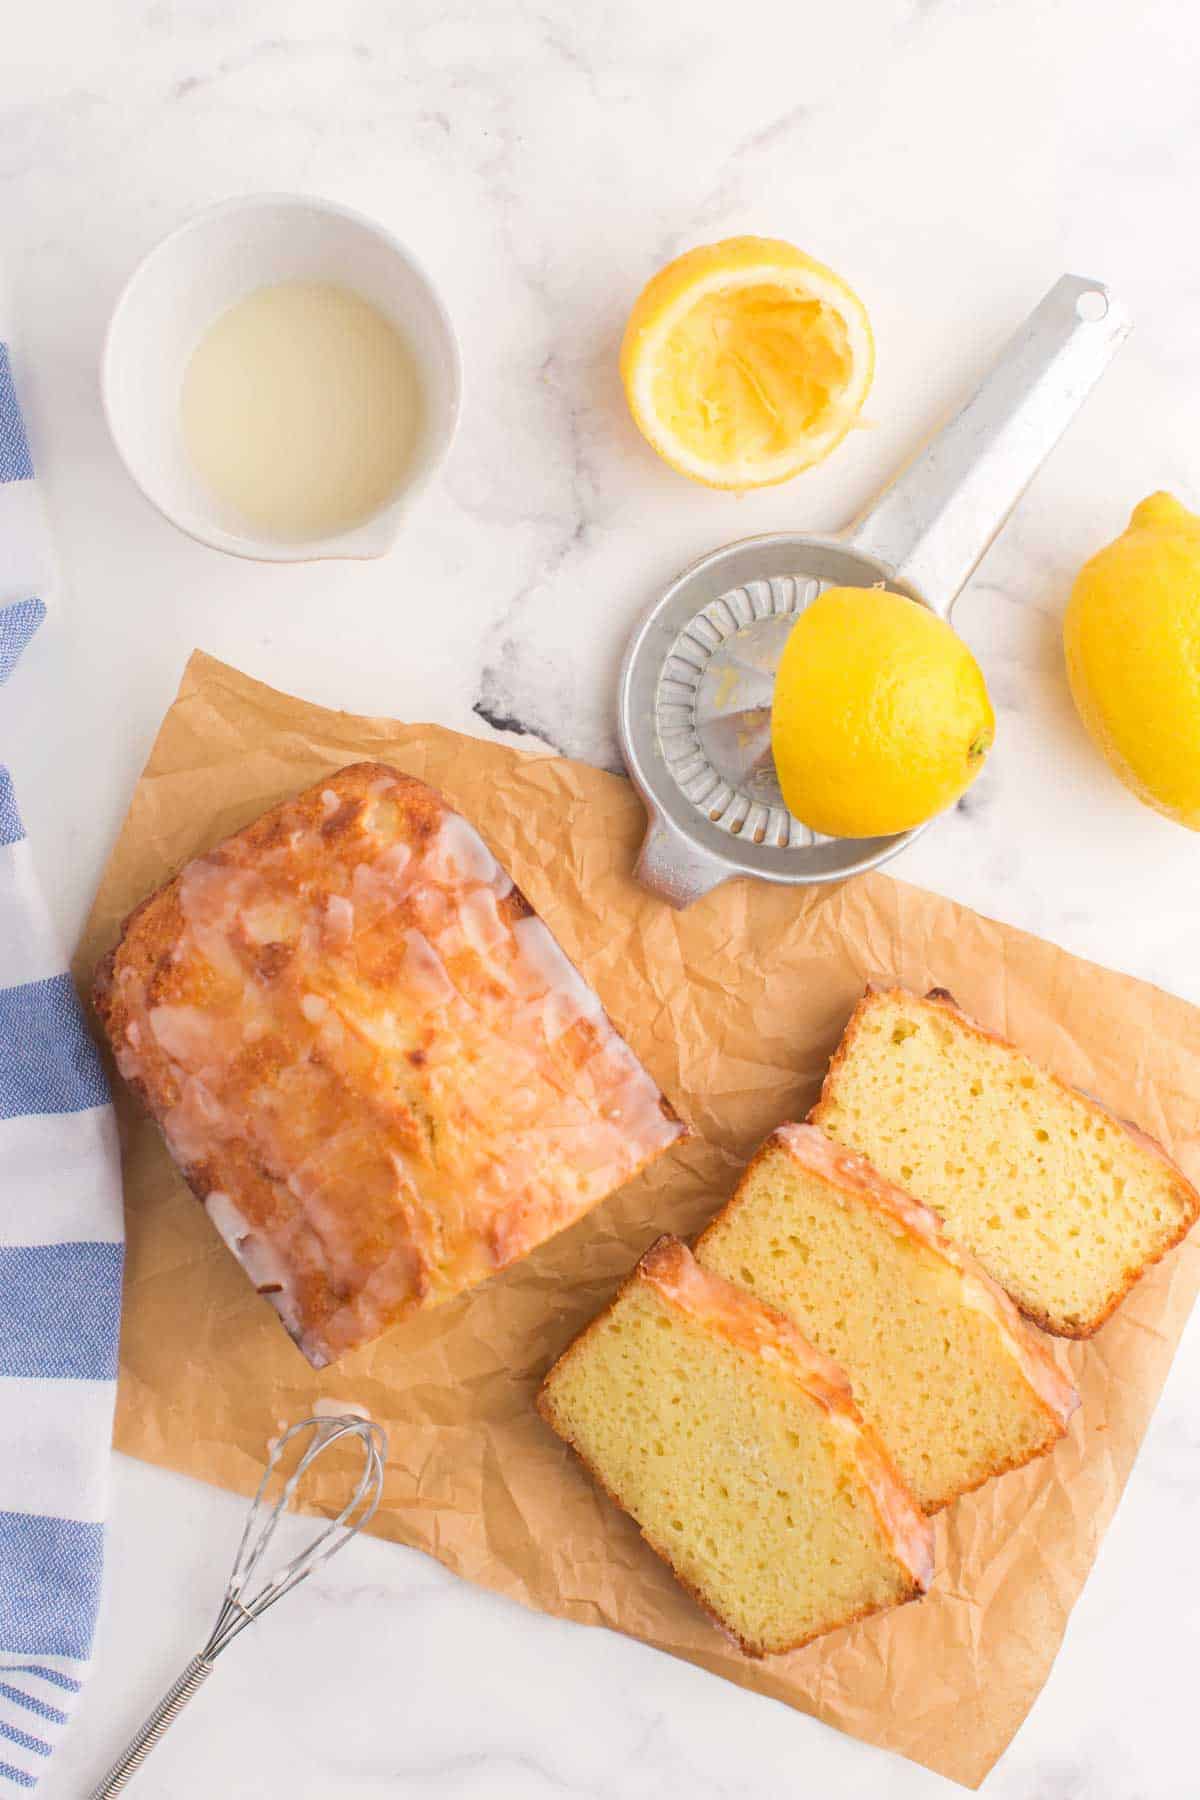 Half of the lemon pound cake on a piece of parchment alongside three slices and a whisk dripping with glaze.